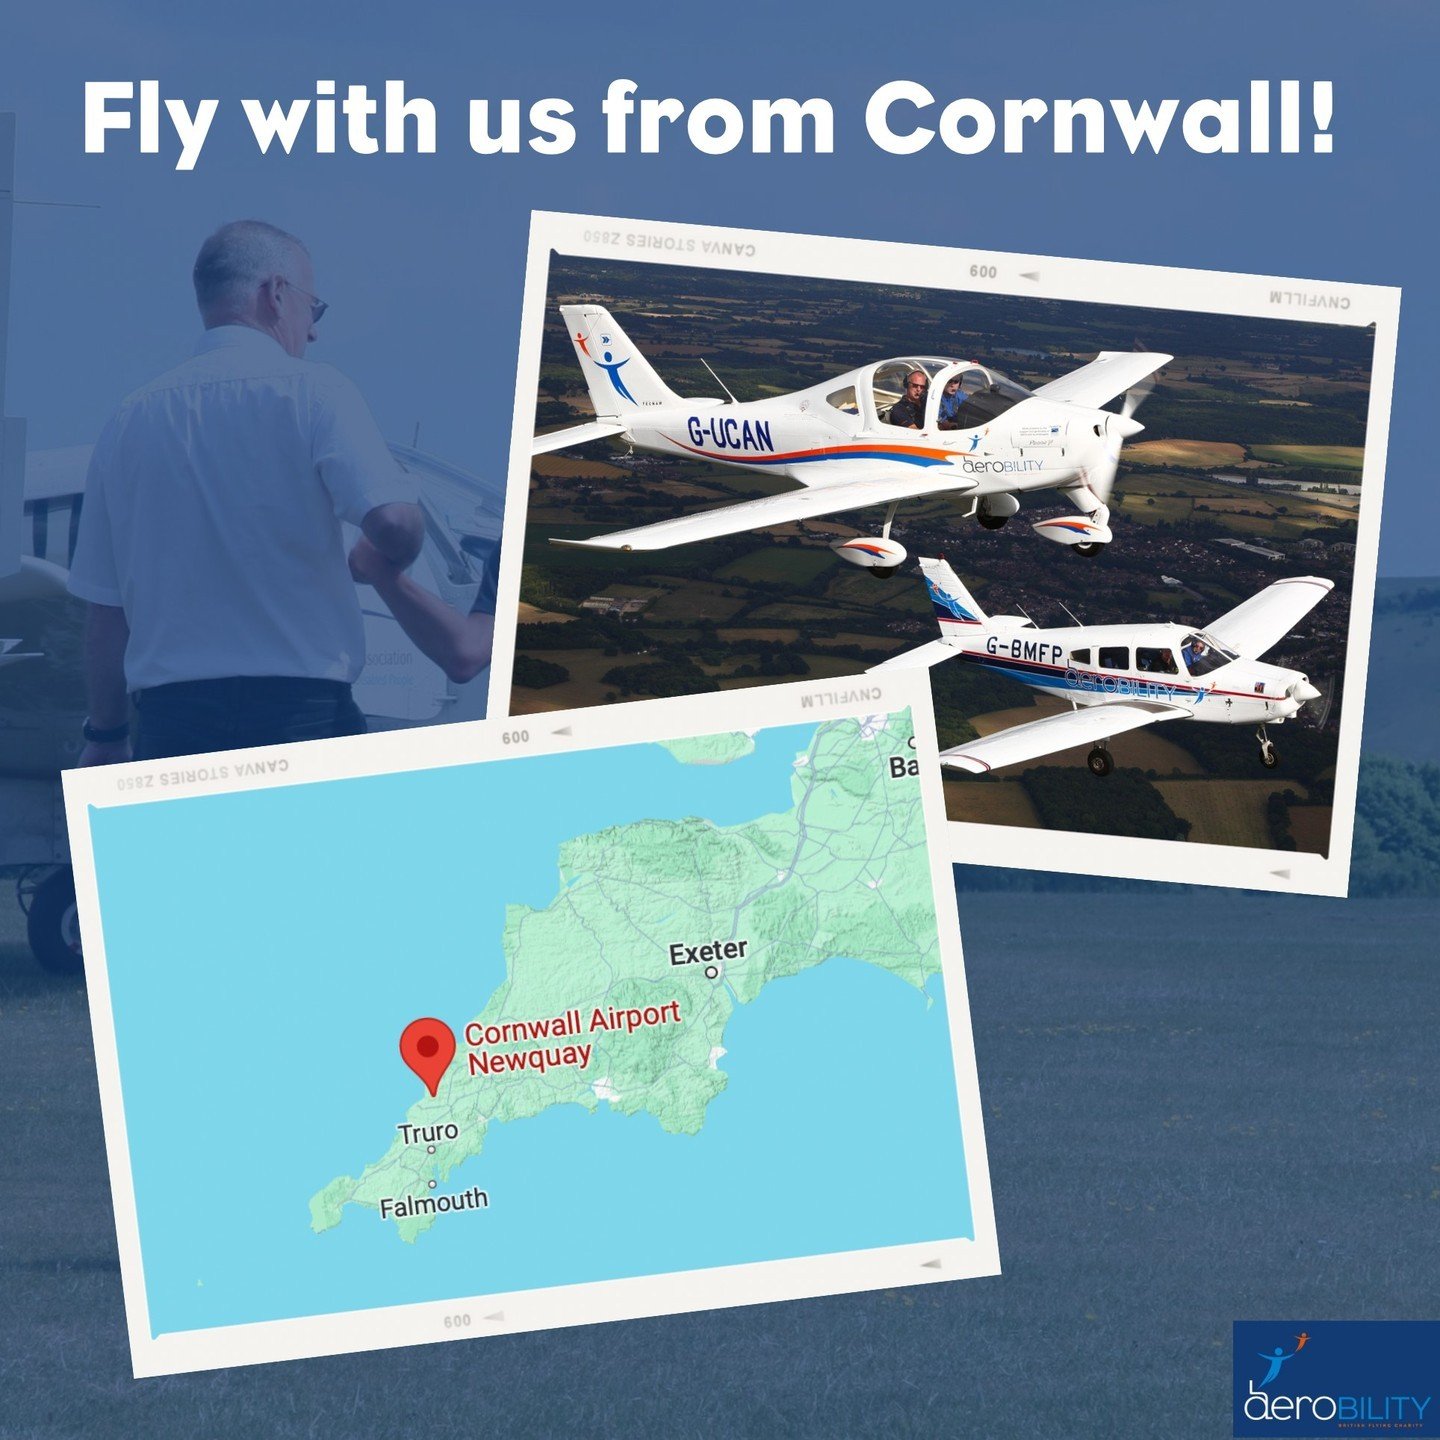 We are excited to share that flying lessons with Aerobility will be available from @Cornwall_Airport for a limited time in August 2024!

We have partnered with @Flynqy which operates from Cornwall Airport Newquay to bring our flying experiences to th